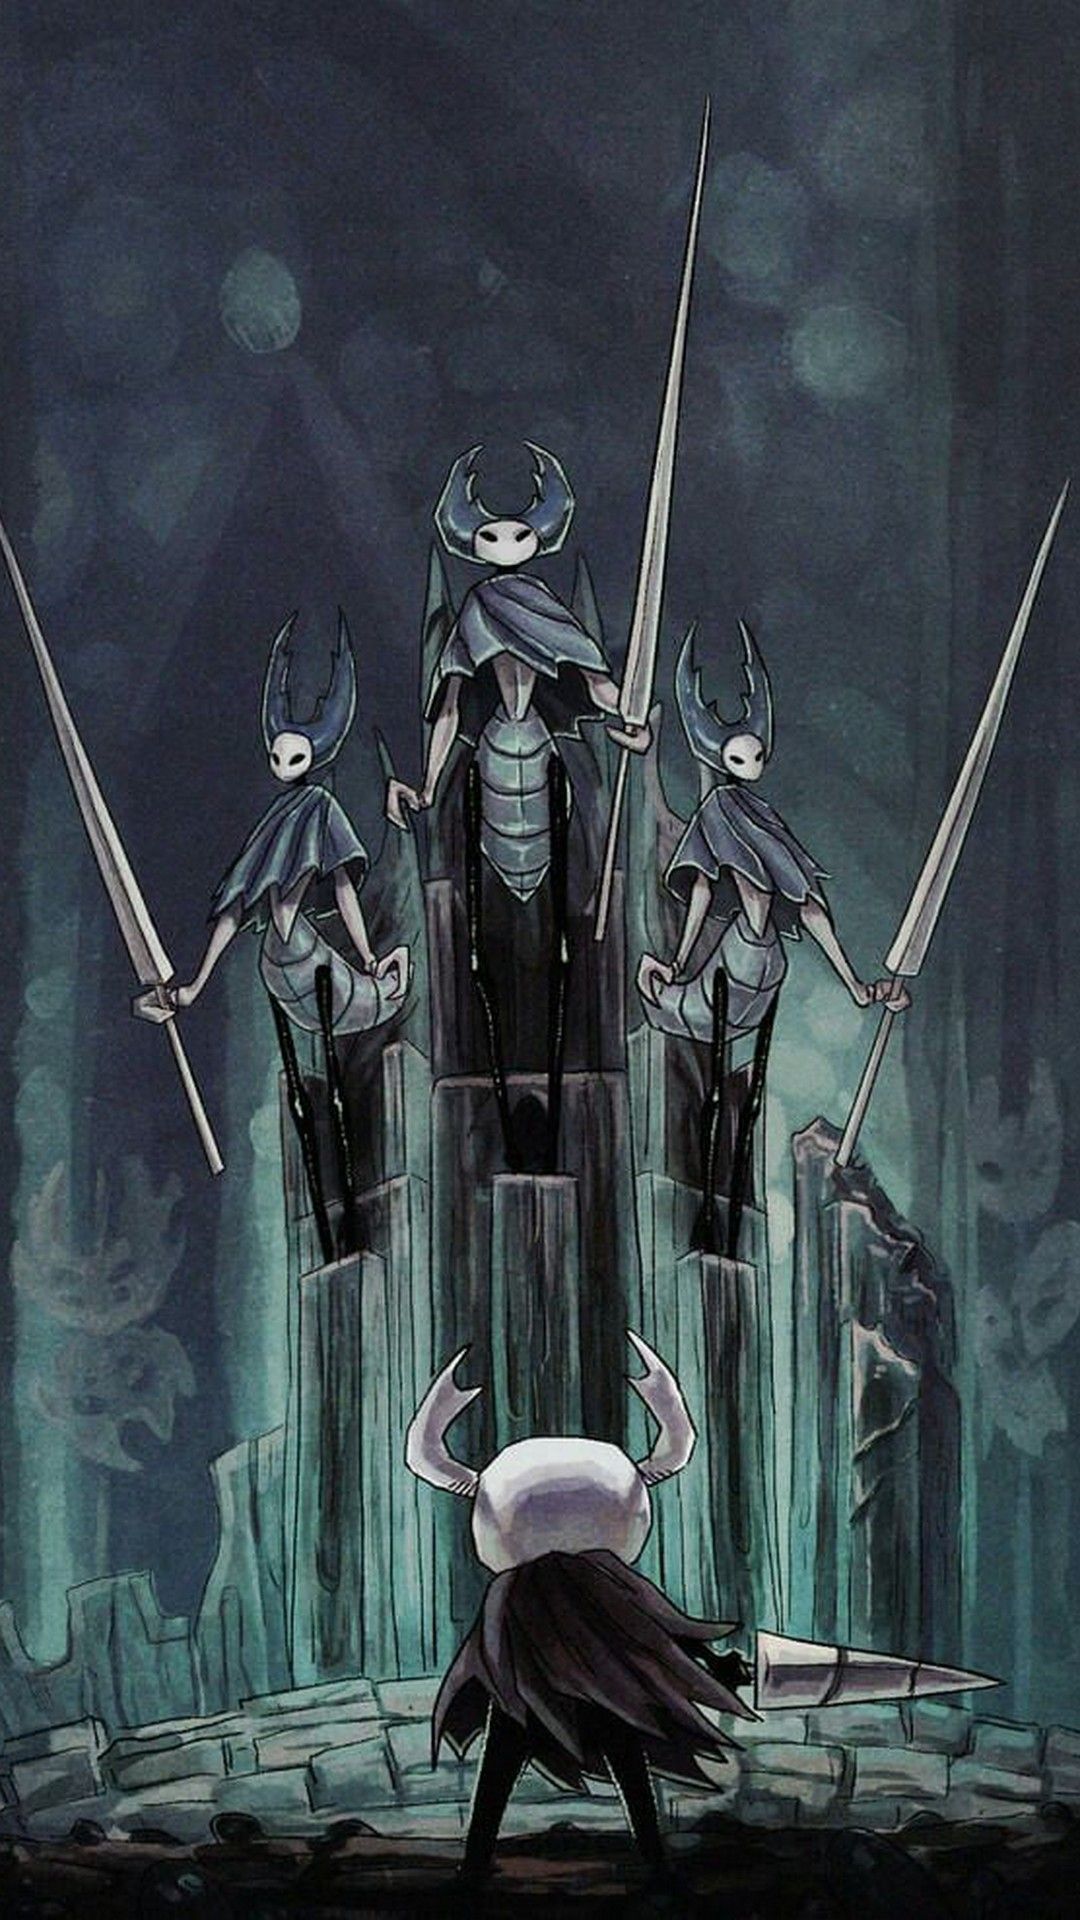 android wallpapers hollow knight